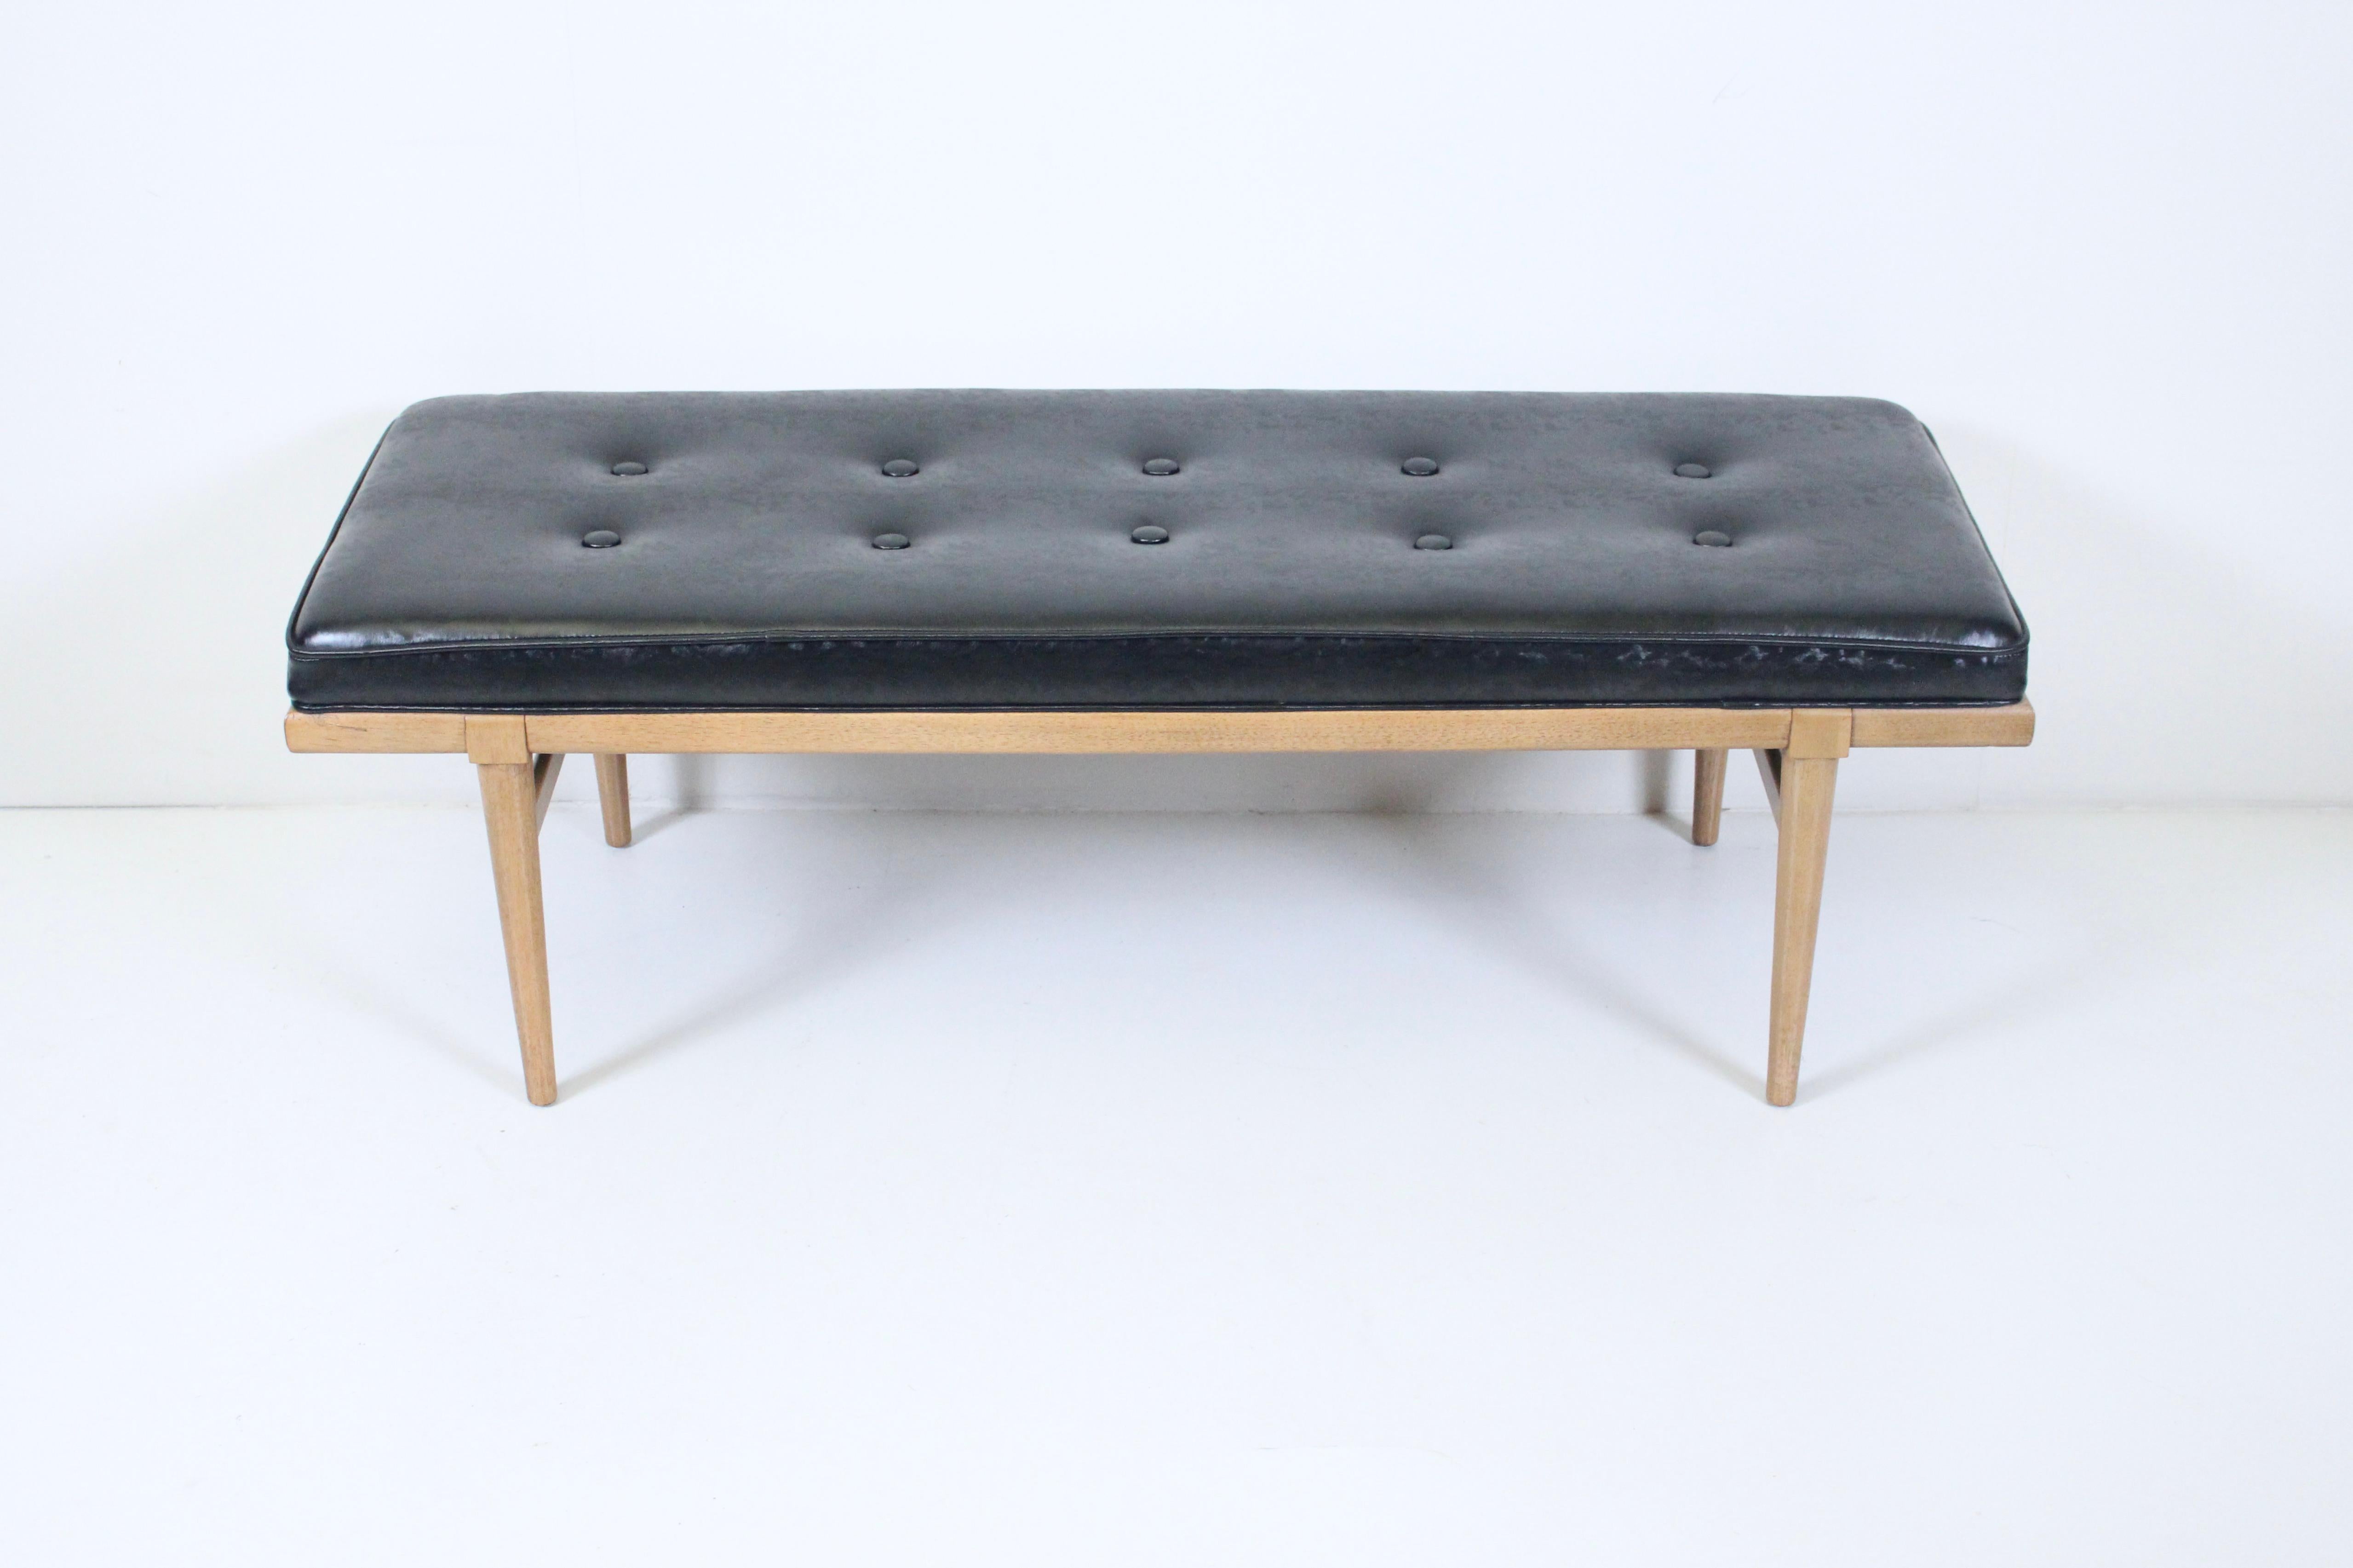 Robsjohn-Gibbings for Widdicomb bleached mahogany bench with tufted black vinyl surface. Featuring a sturdy rectangular braced, solid Mahogany frame, button tufted, finished in impressed, patterned faux black leather. Coffee table with tray.